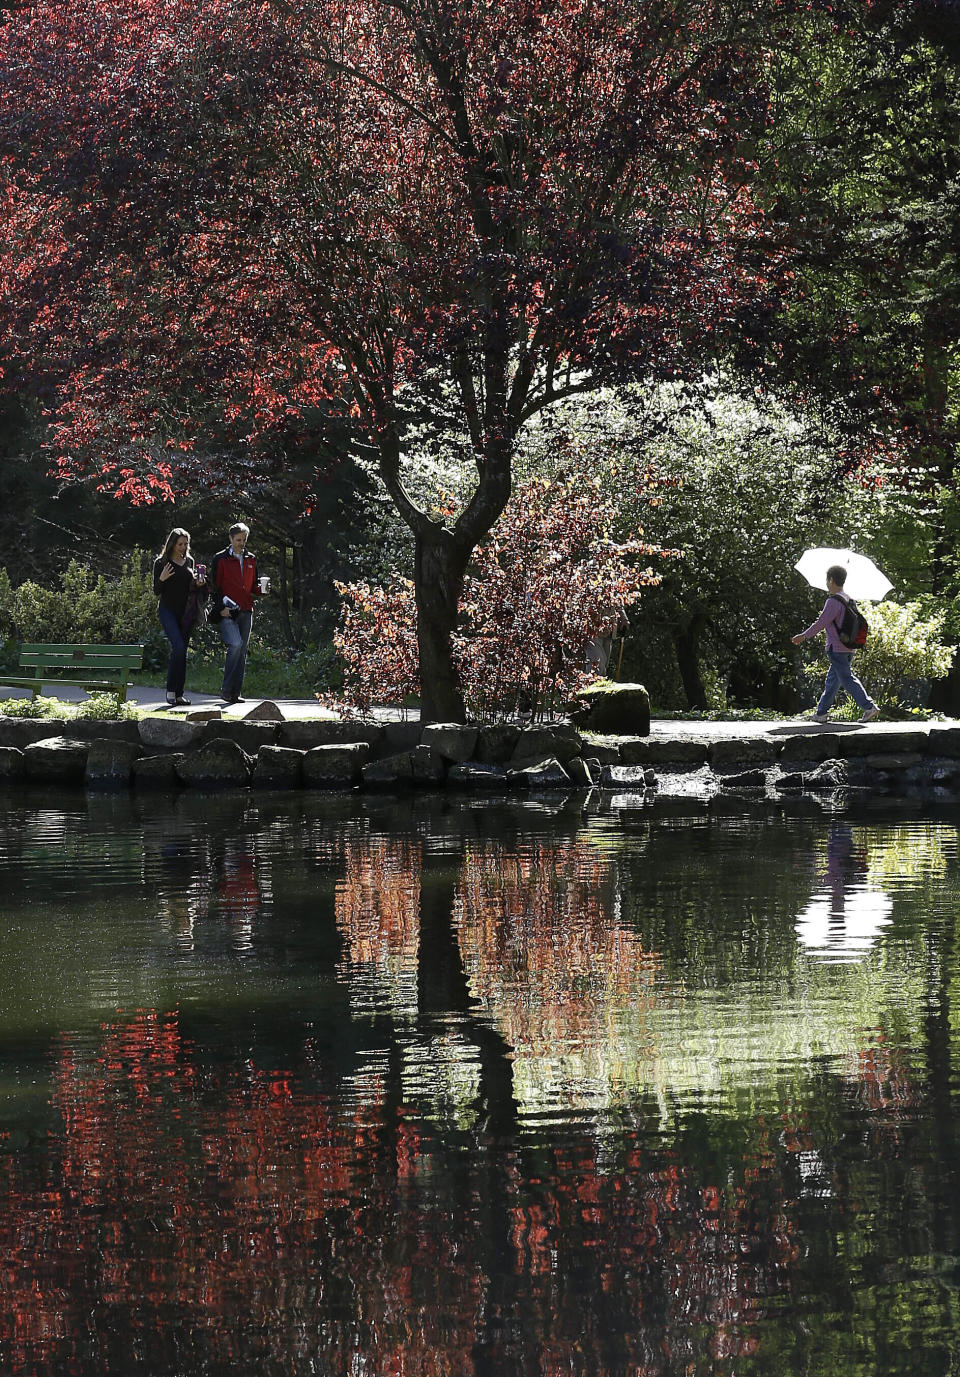 FILE - In this March 10, 2014, file photo, pedestrians walk along a path at Golden Gate Park's Stowe Lake in San Francisco. Golden Gate Park turned 150 years old on Saturday, April 4, 2020, and the huge party to celebrate San Francisco's beloved treasure will, for the time being, take place online. (AP Photo/Jeff Chiu, File)